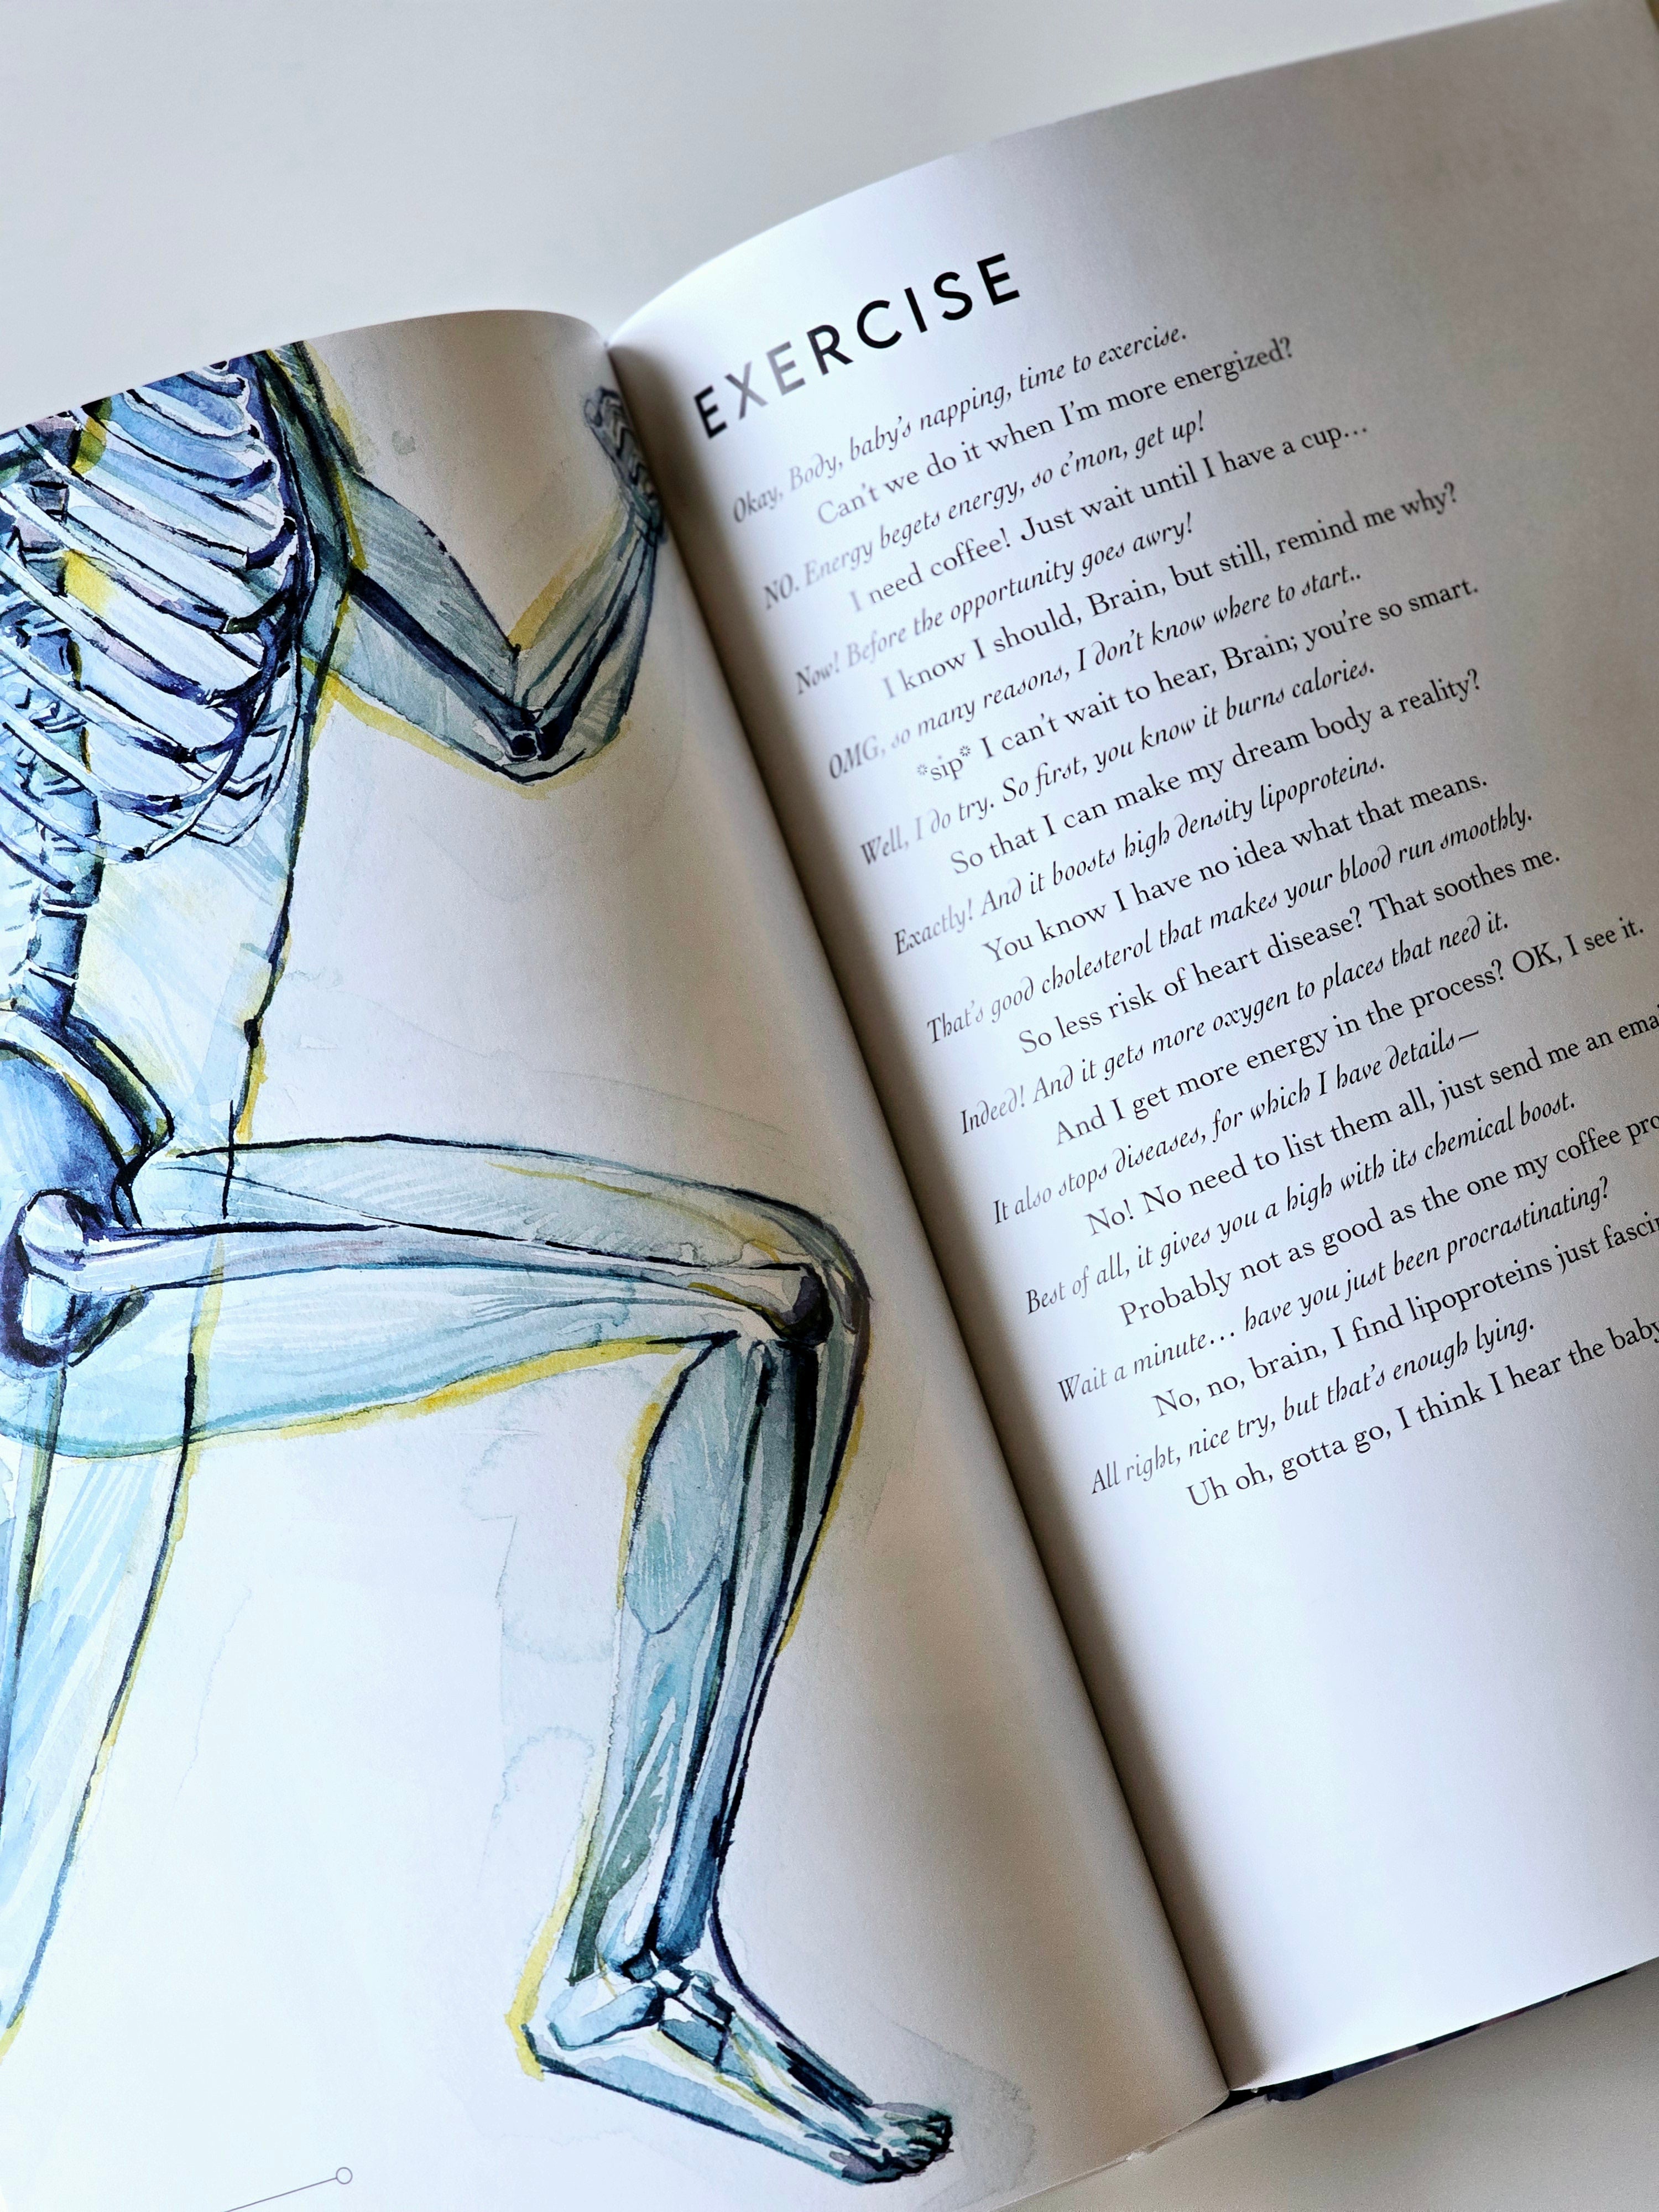 Anatomy is Beautiful: A Collection of Anatomical Art & Poetry